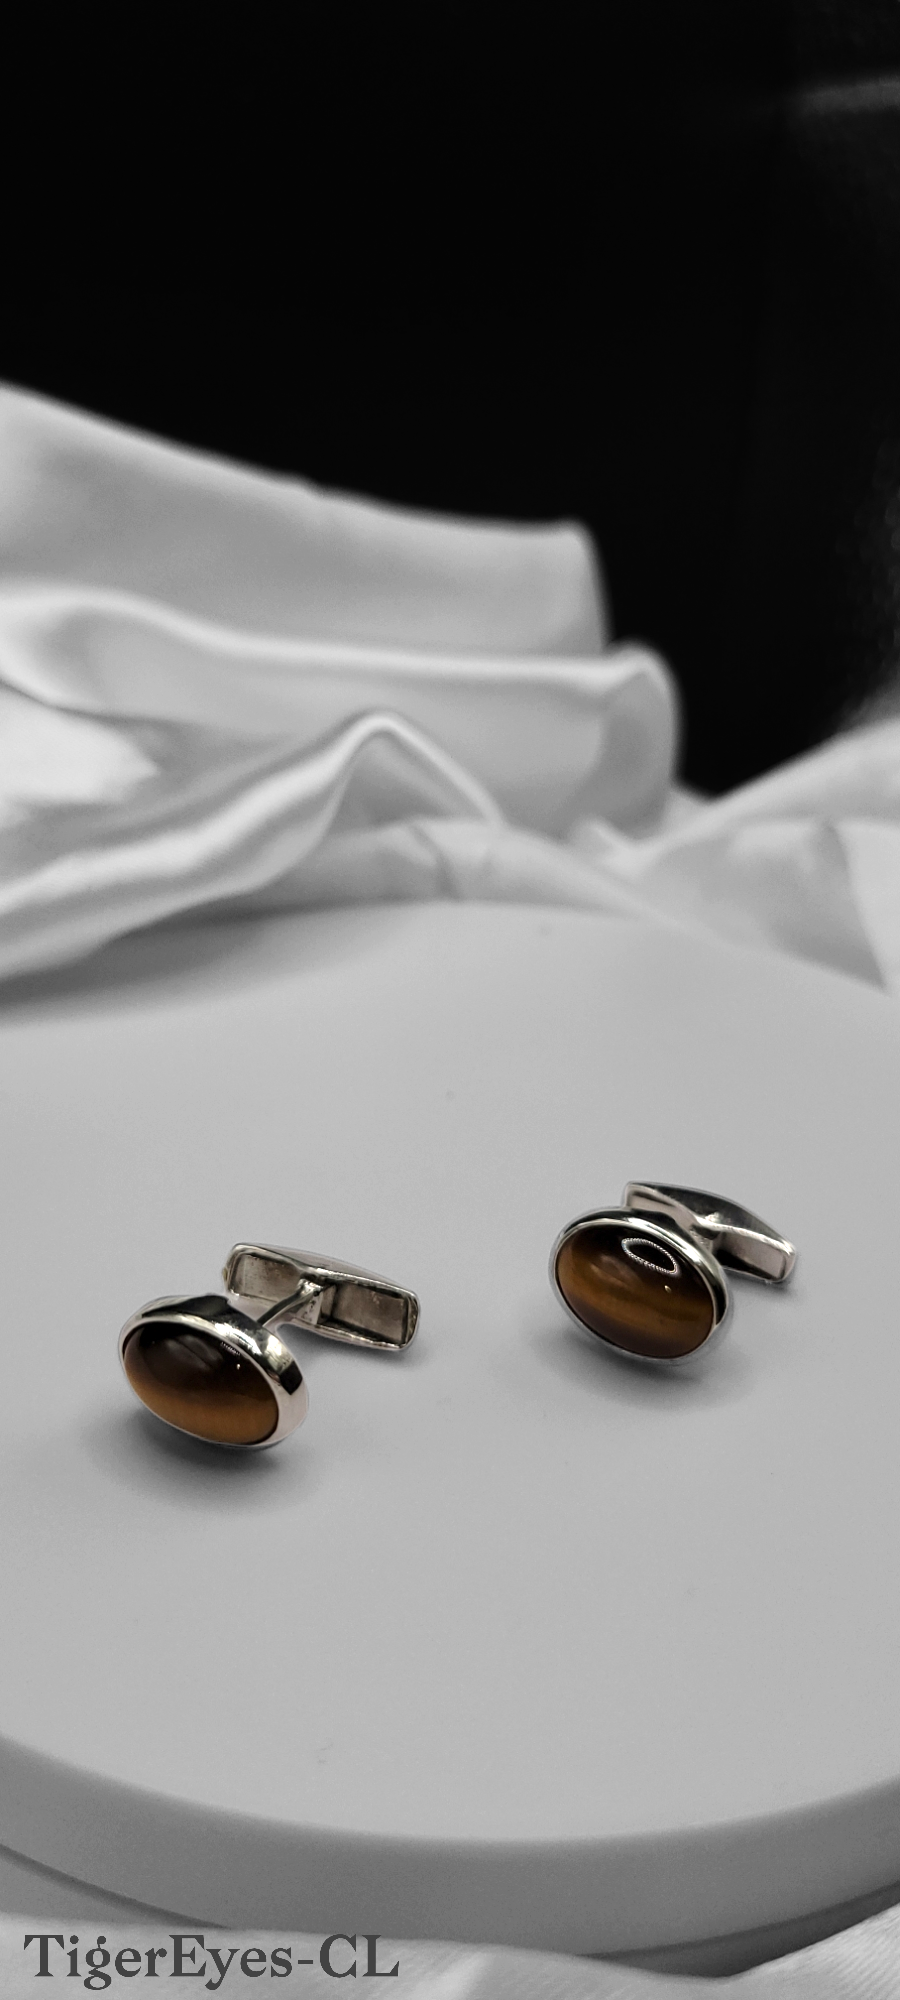 TIGER'S EYES CUFF LINKS ON STERLING SILVER. KNOWN AS THE STONE OF PROTECTION!